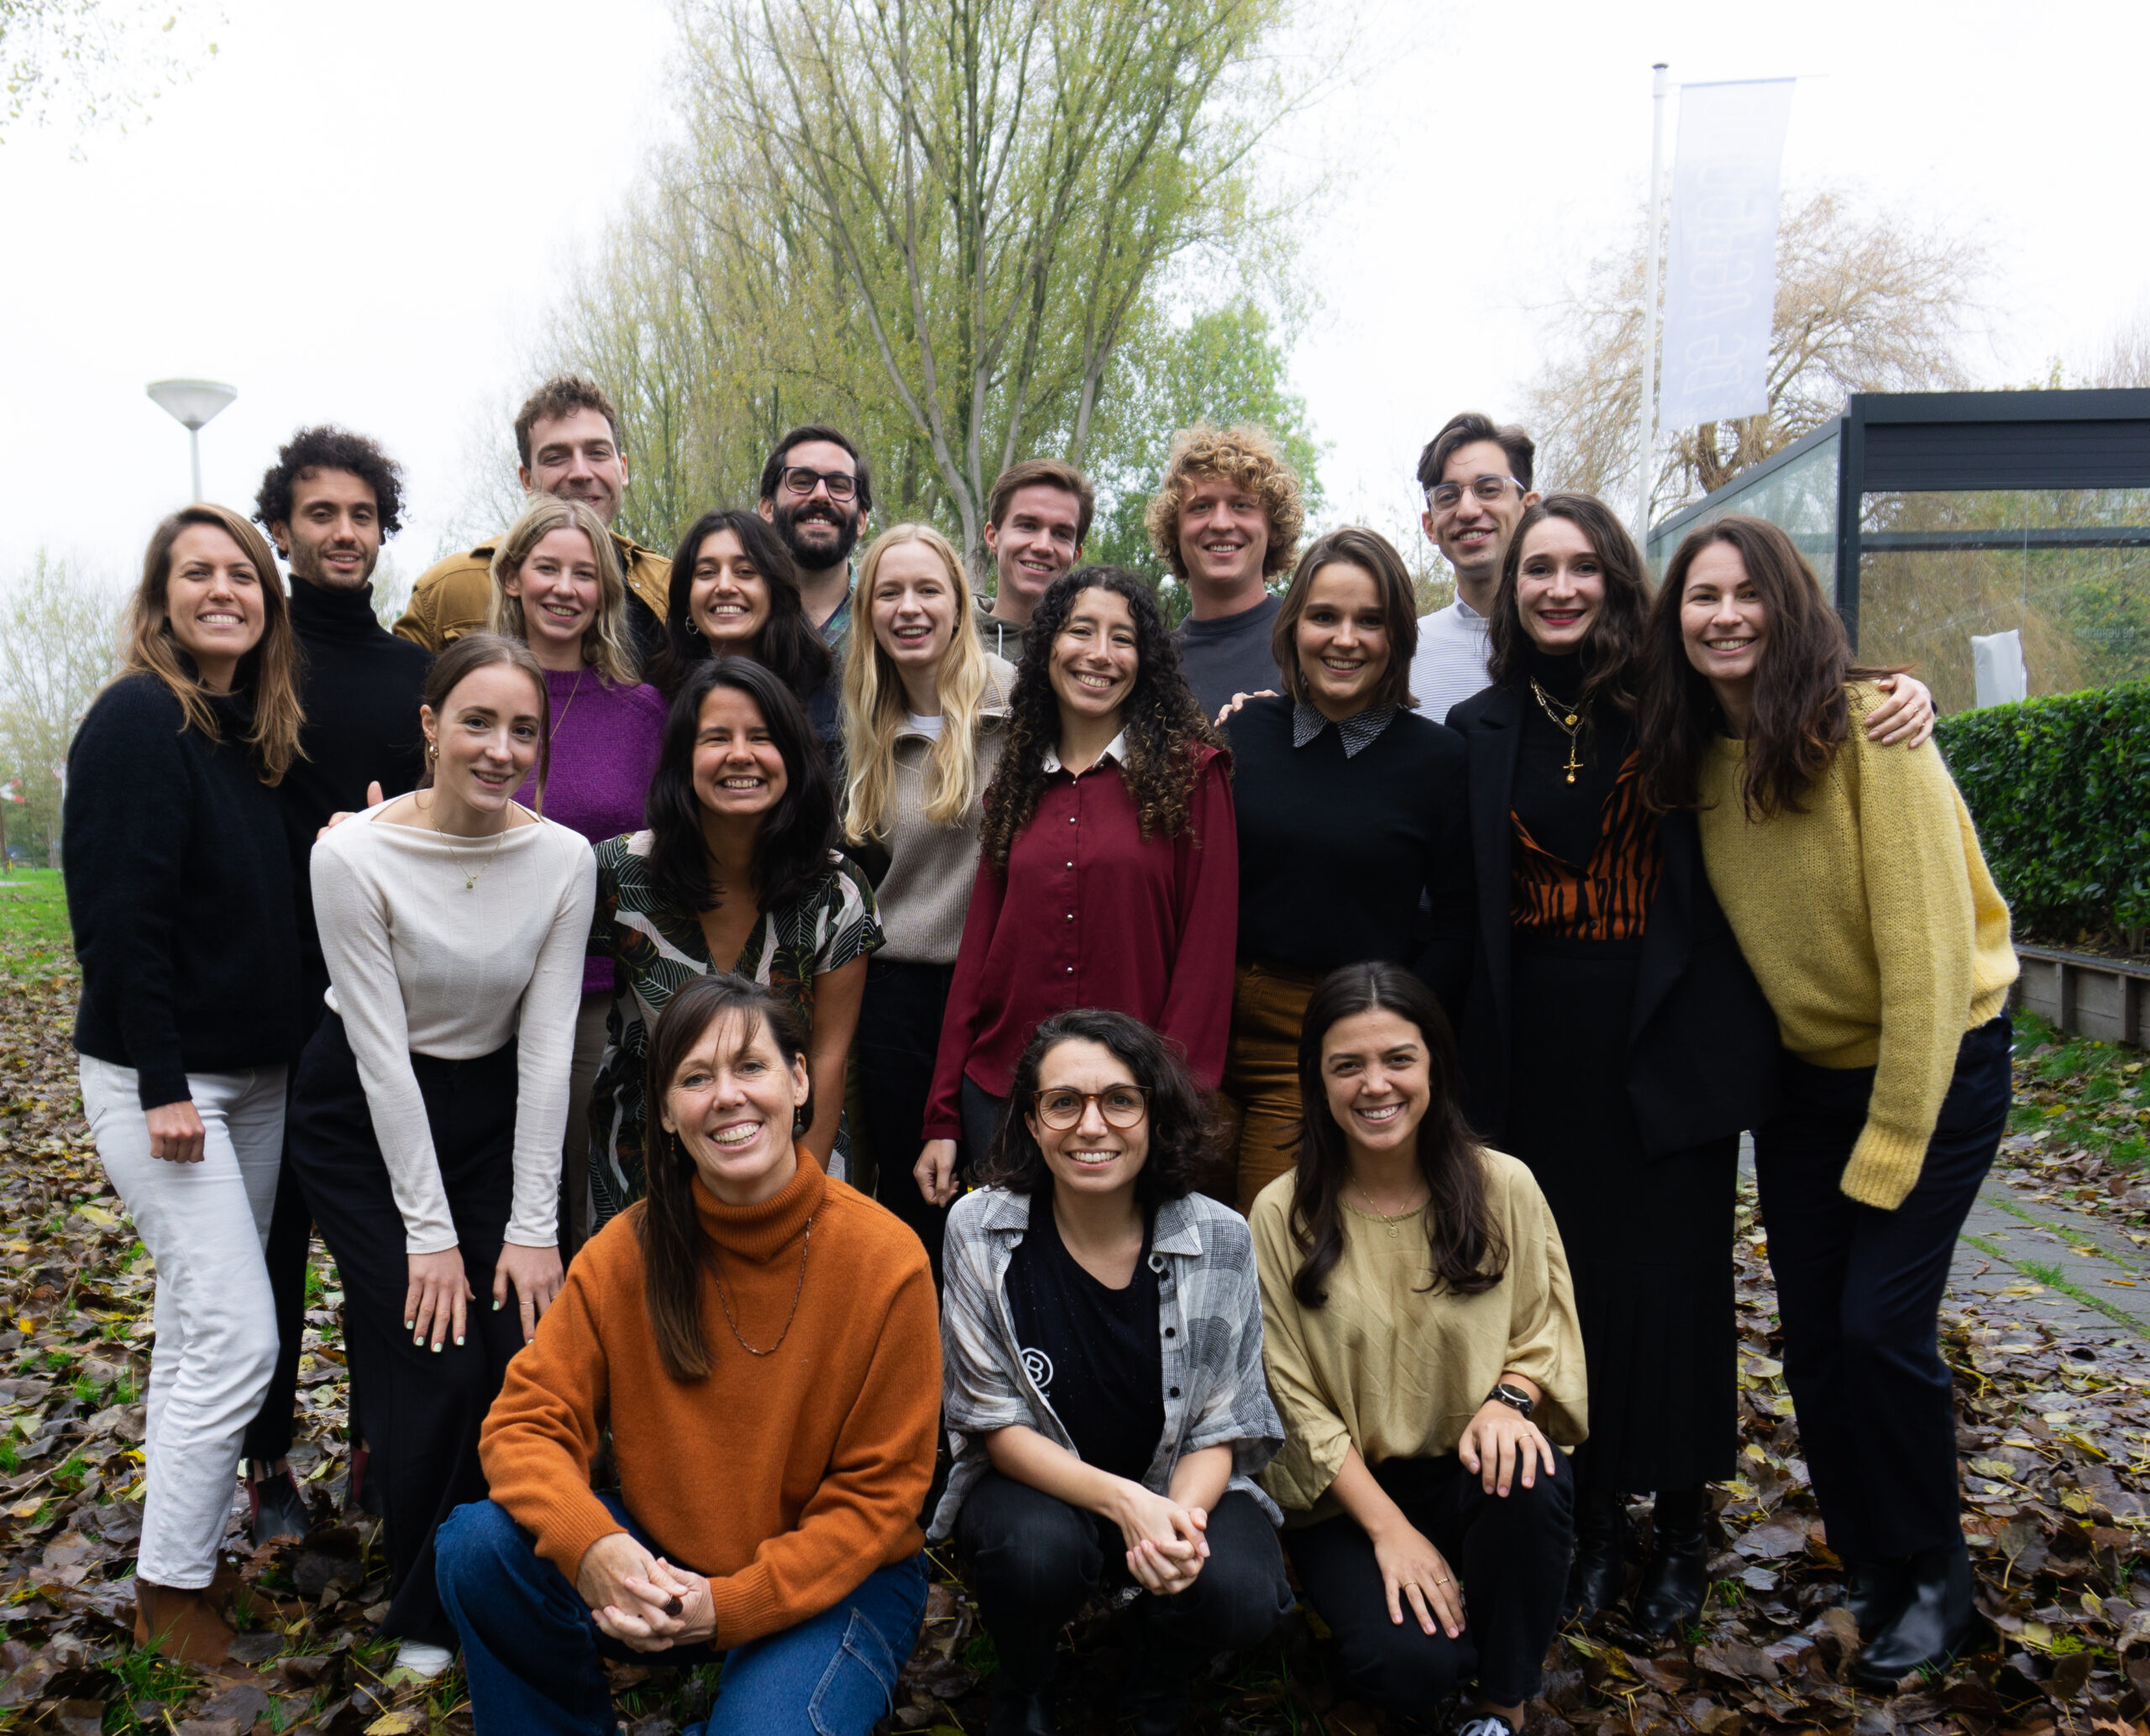 Members of the B Lab Europe team supporting the B Corp movement in Europe, 2022. Photo credit: Lucia Baruzzi